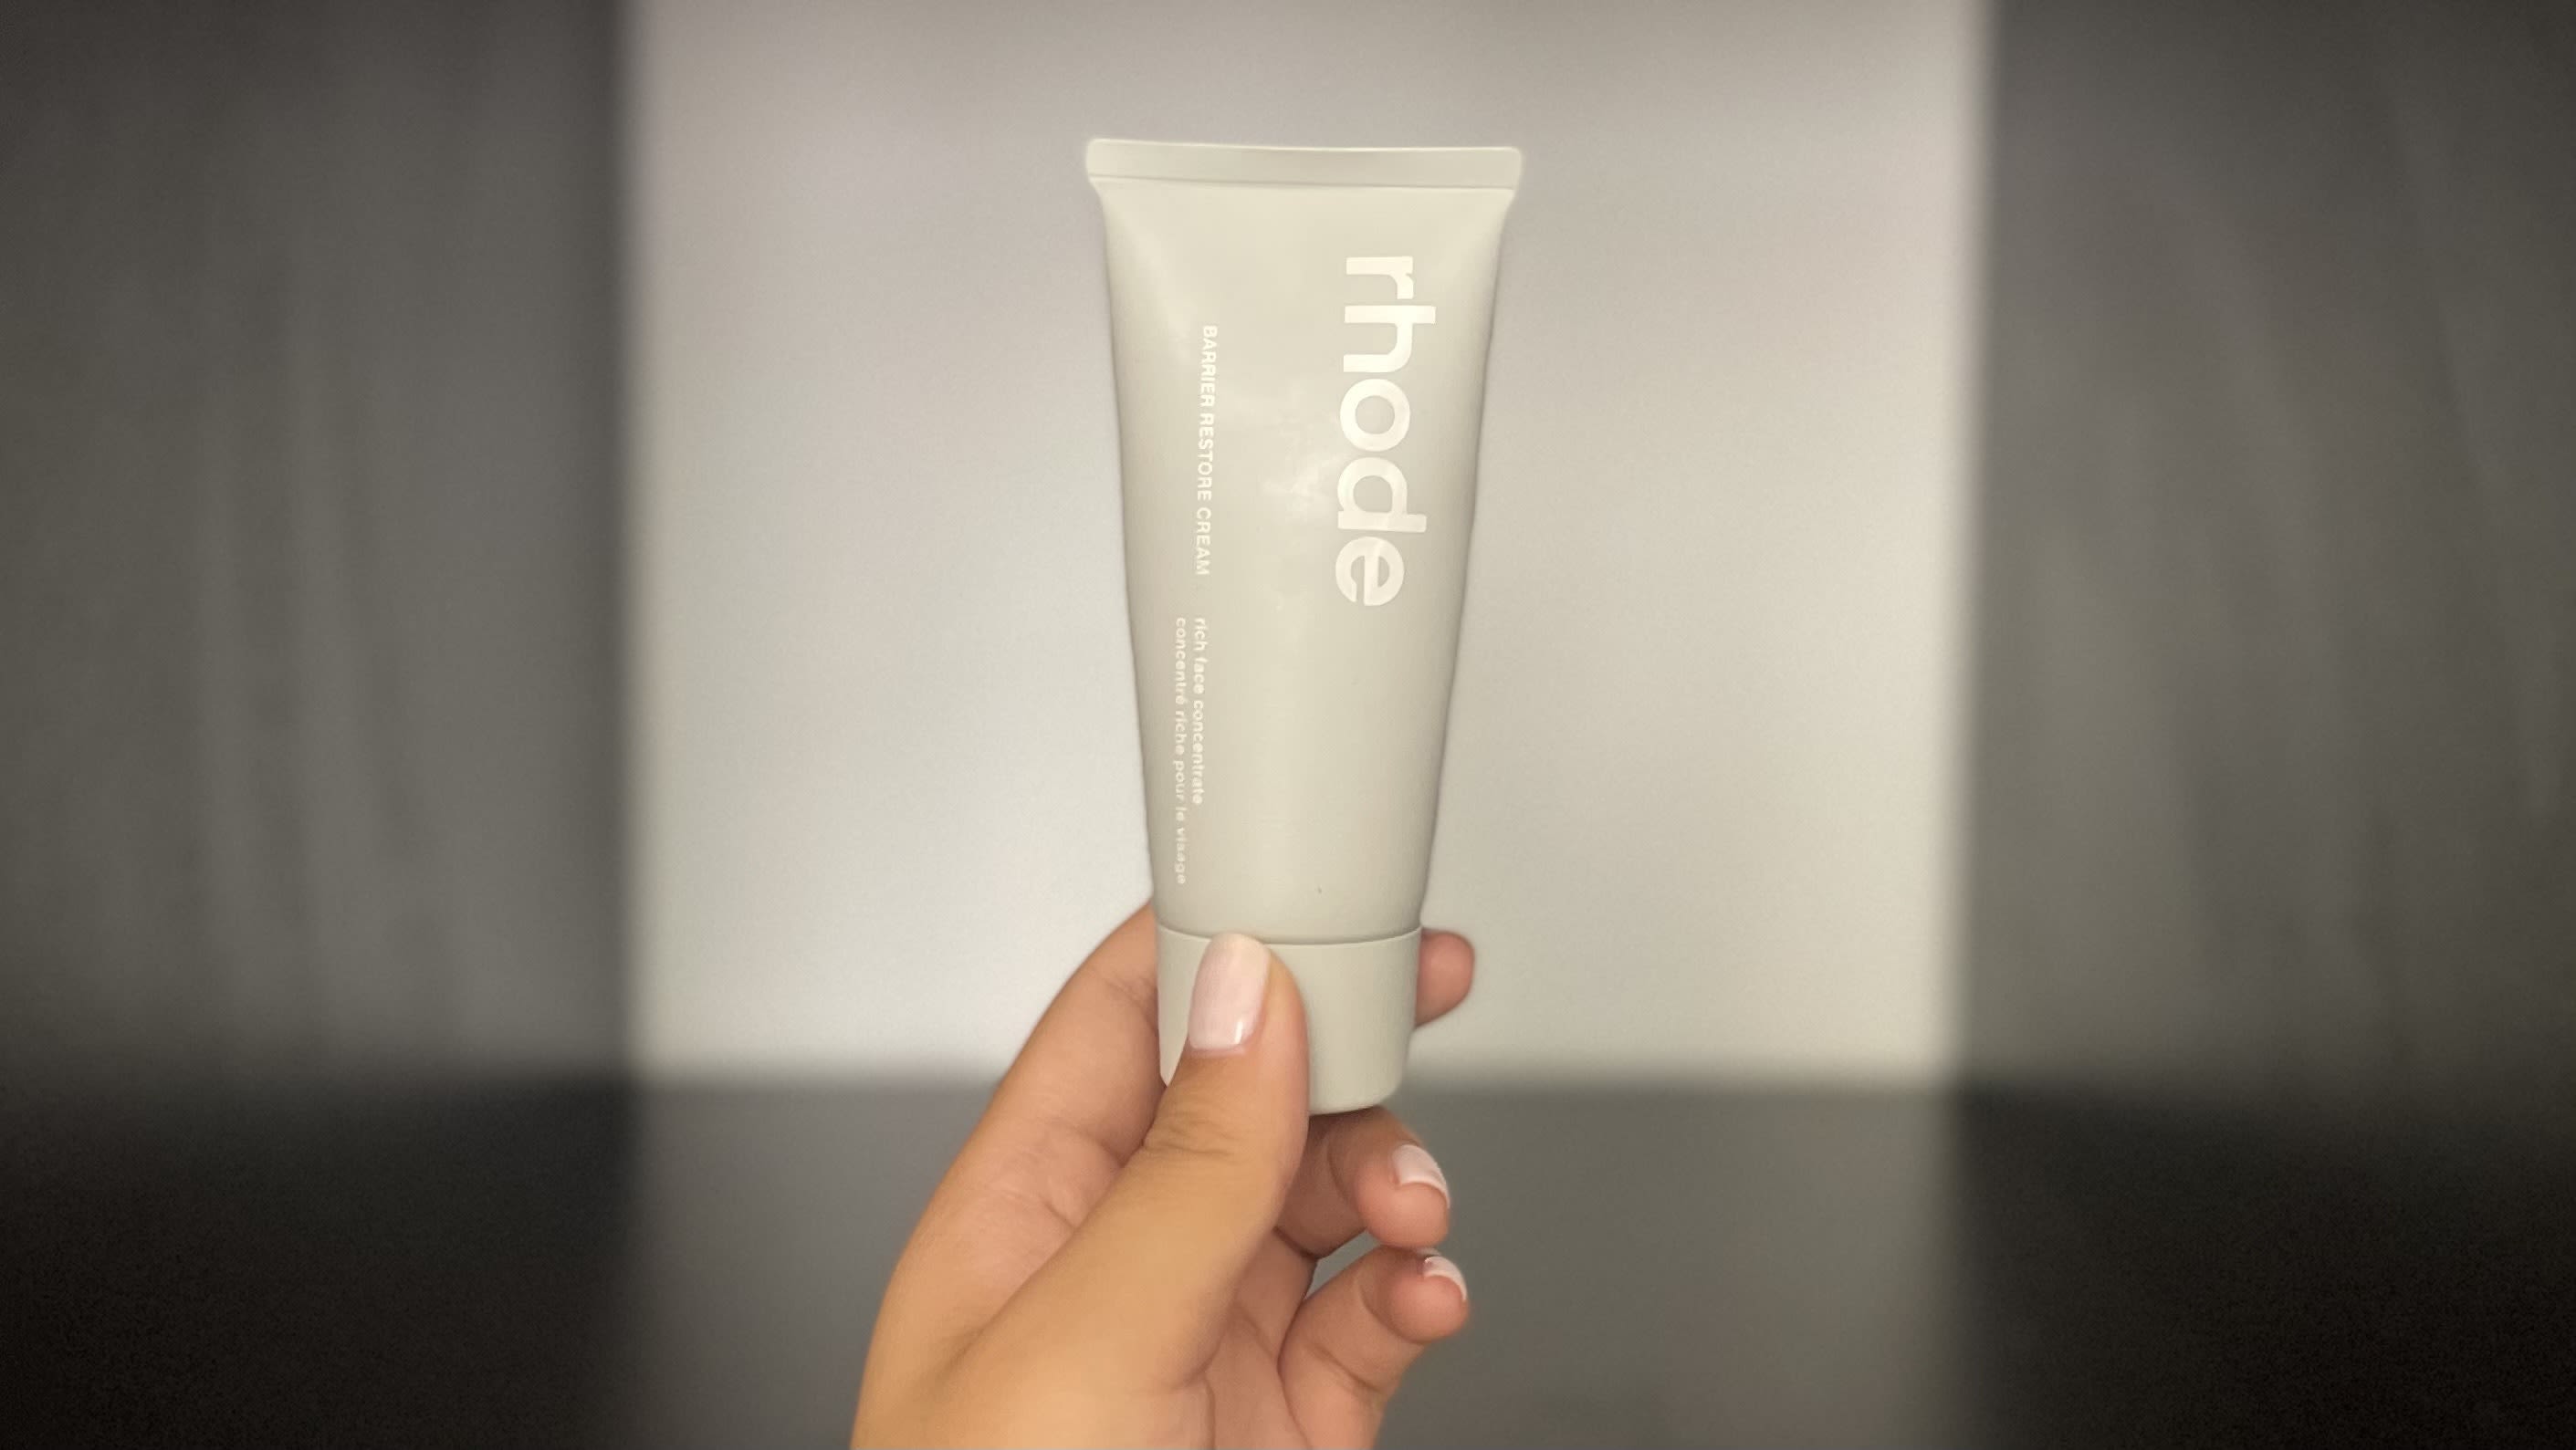 Rhode skin care by Hailey Bieber review: Lip treatments, creams and  hydrating serums | CNN Underscored